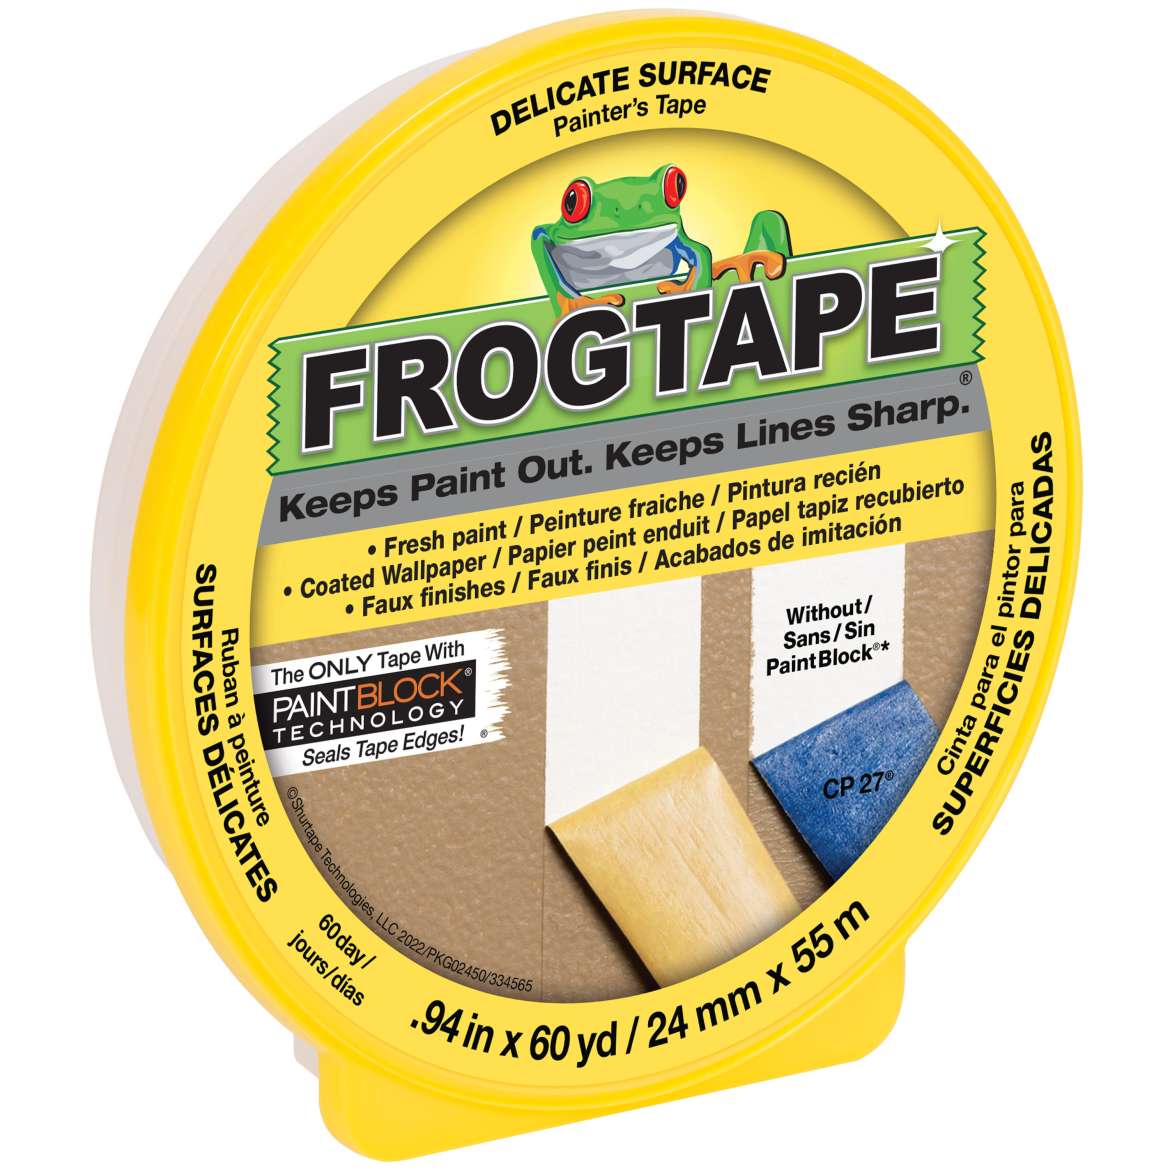 FrogTape® Delicate Surface Painter's Tape - Yellow, 0.94 in. x 60 yd.